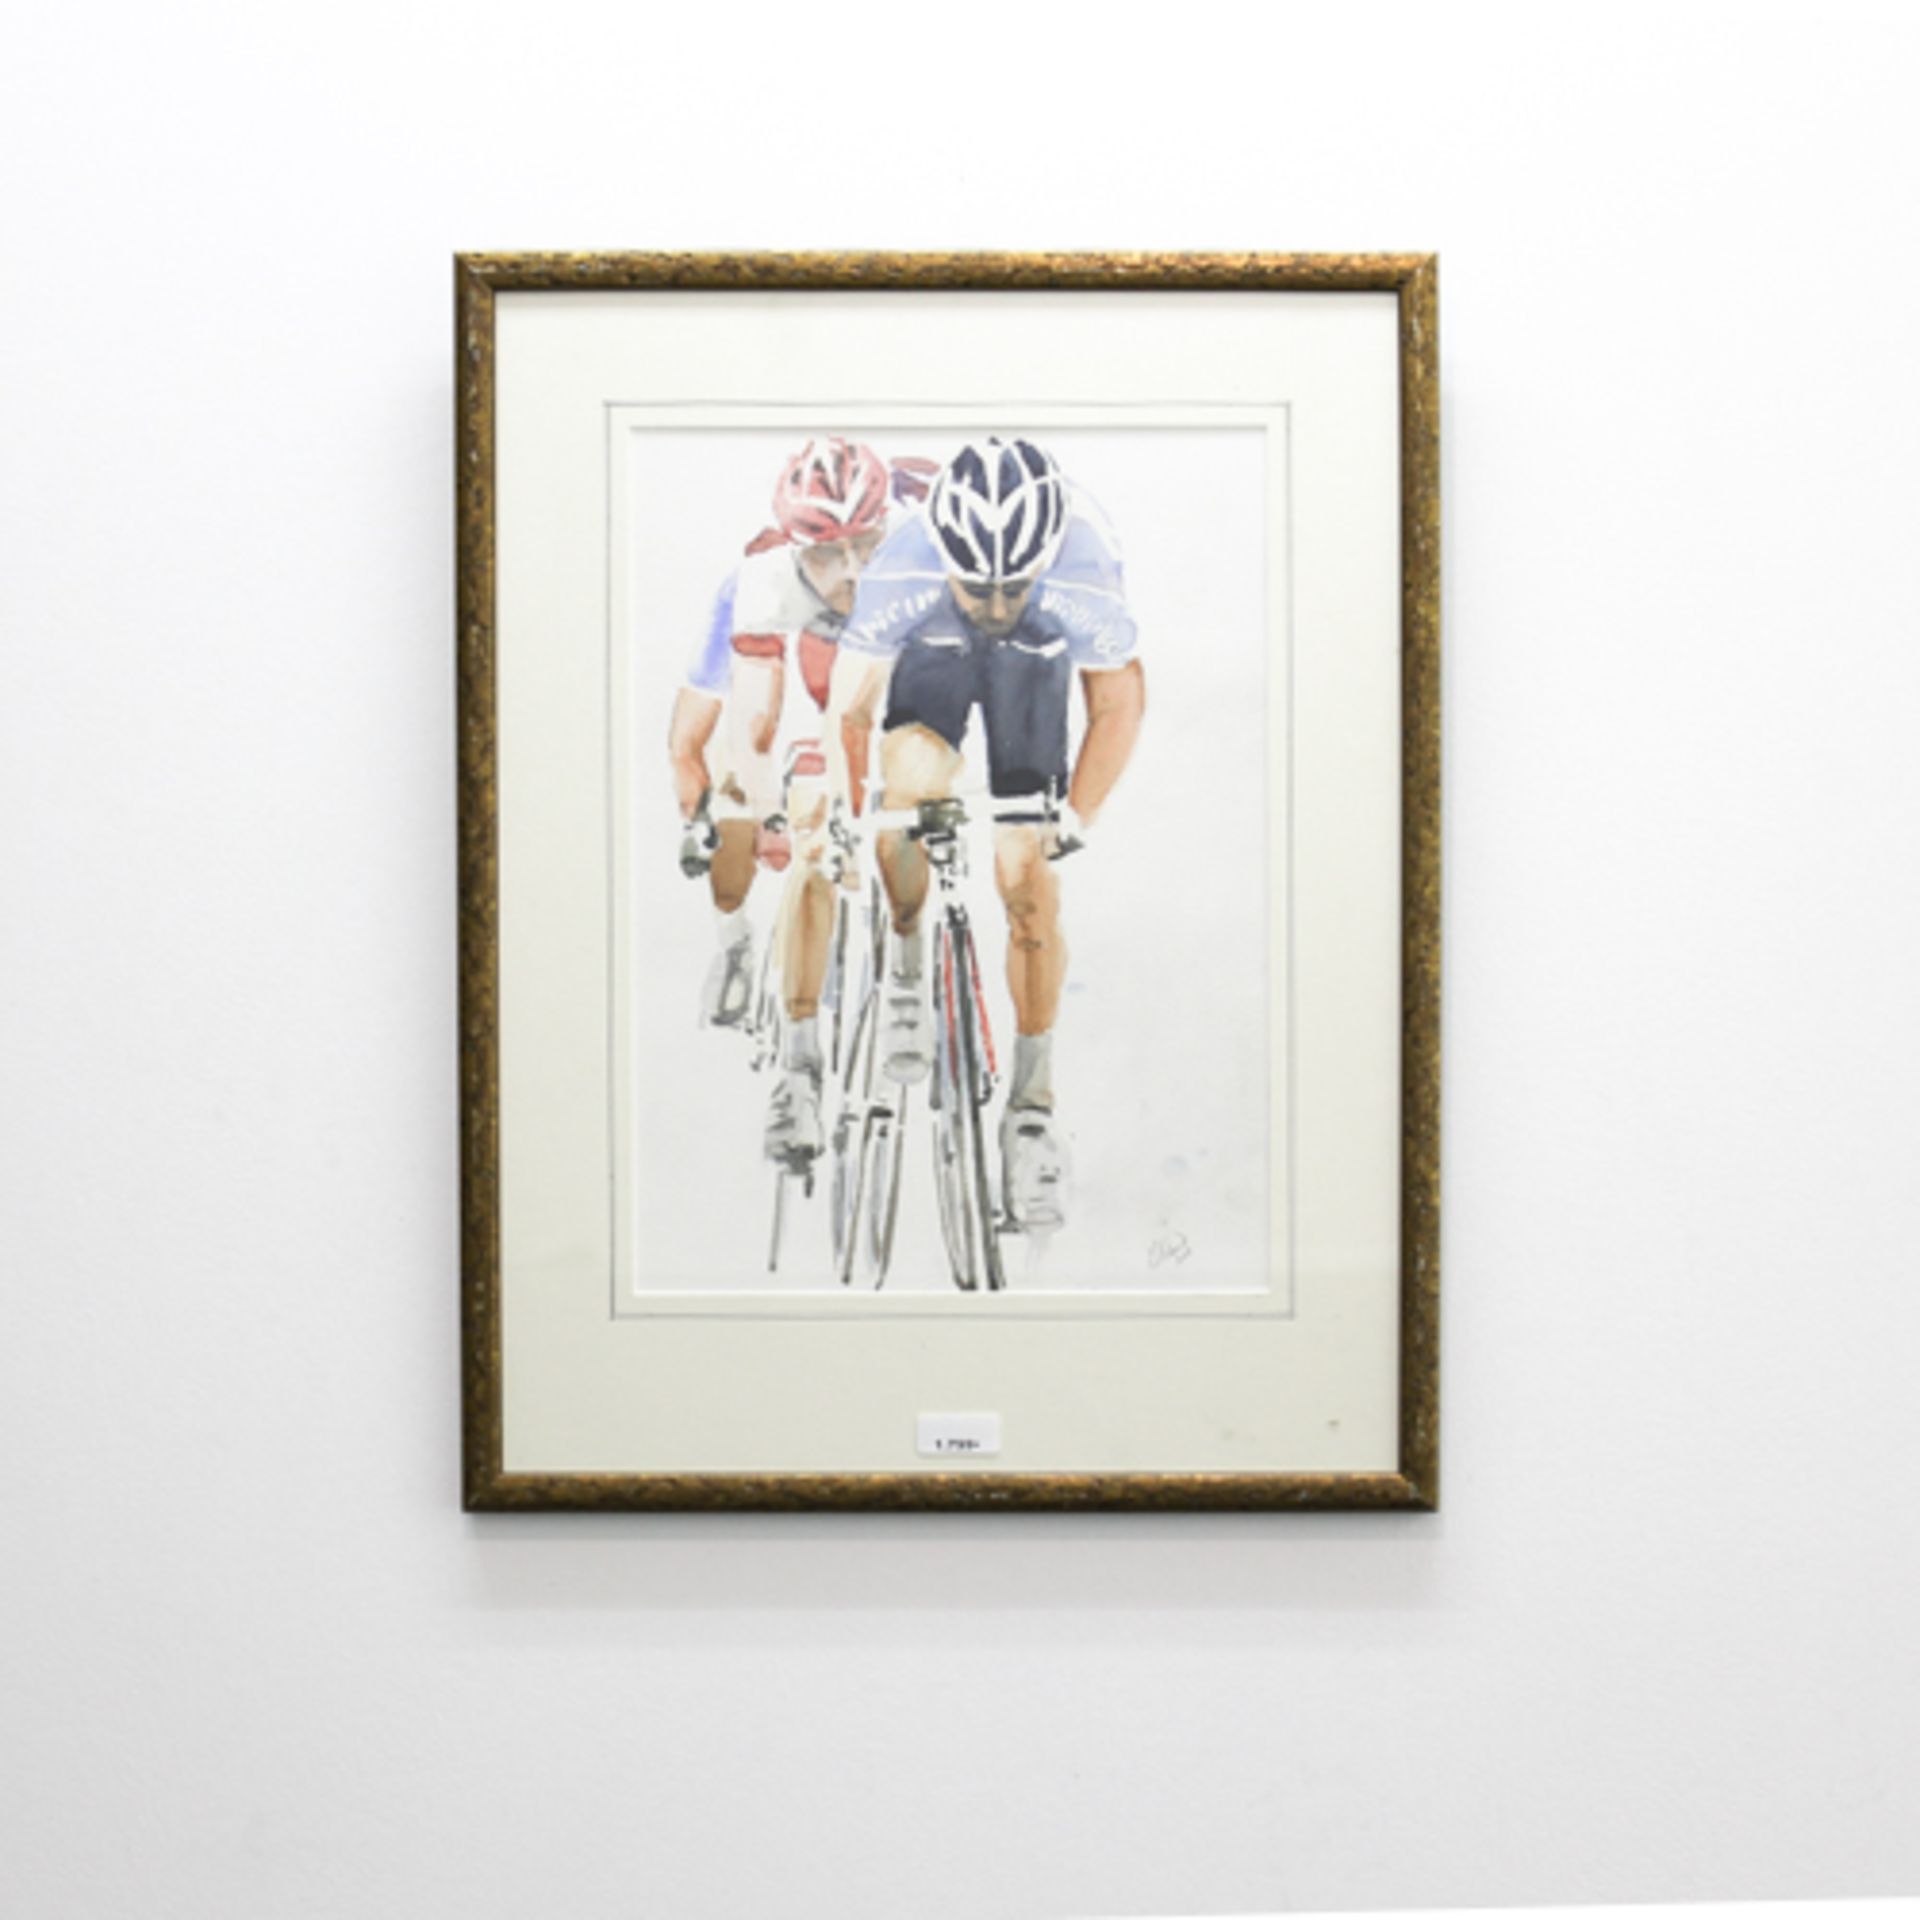 SIGNED WATERCOLOR DEPICTING CYCLING 37 x 27 cm.